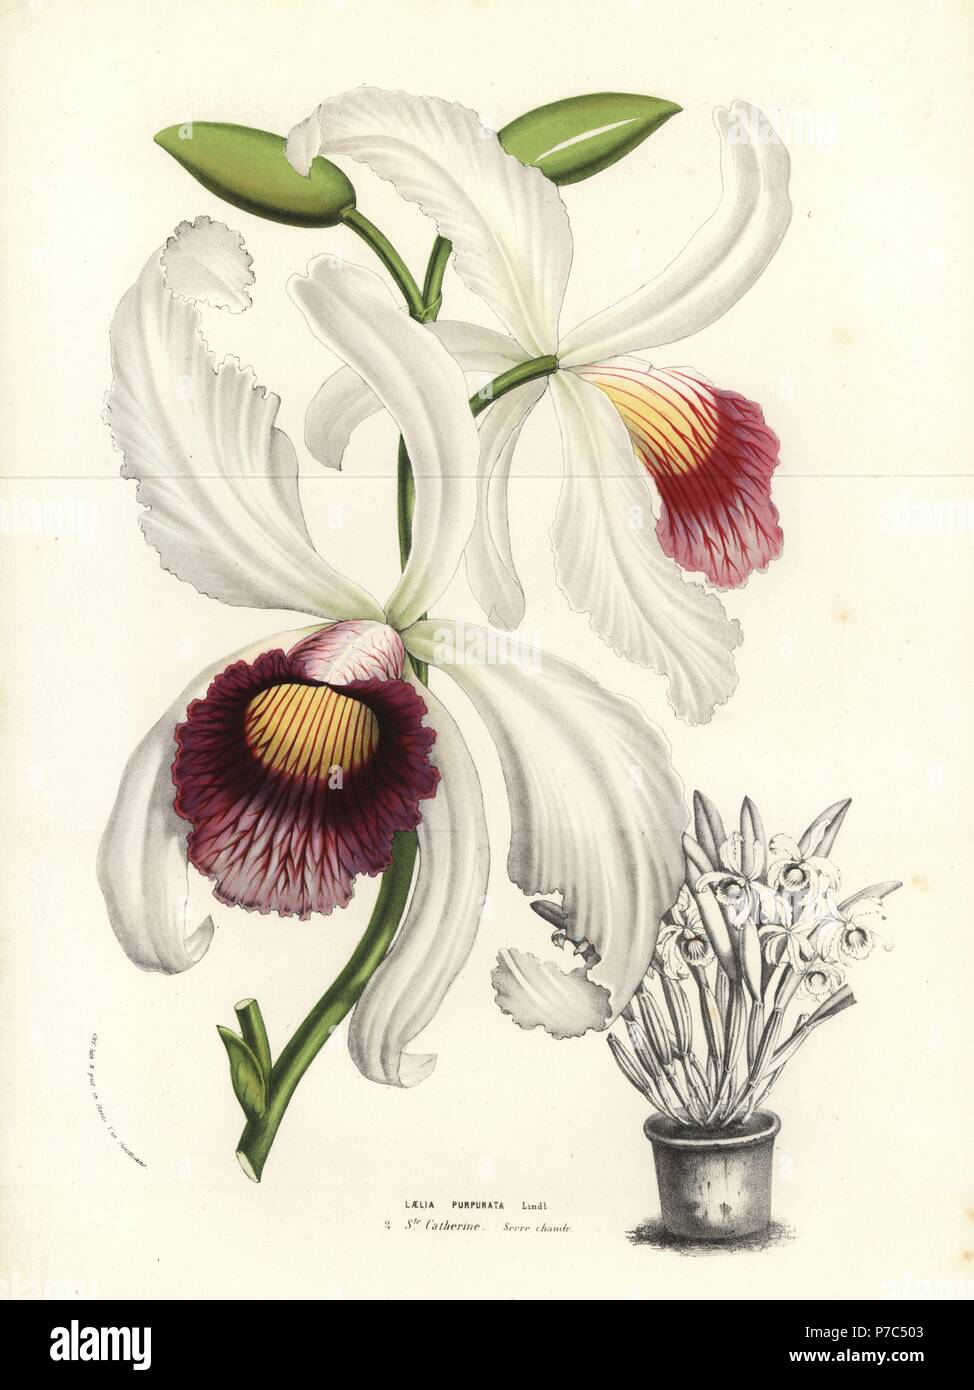 Cattleya purpurata orchid (Laelia purpurata). Handcoloured lithograph from Louis van Houtte and Charles Lemaire's Flowers of the Gardens and Hothouses of Europe, Flore des Serres et des Jardins de l'Europe, Ghent, Belgium, 1856. Stock Photo